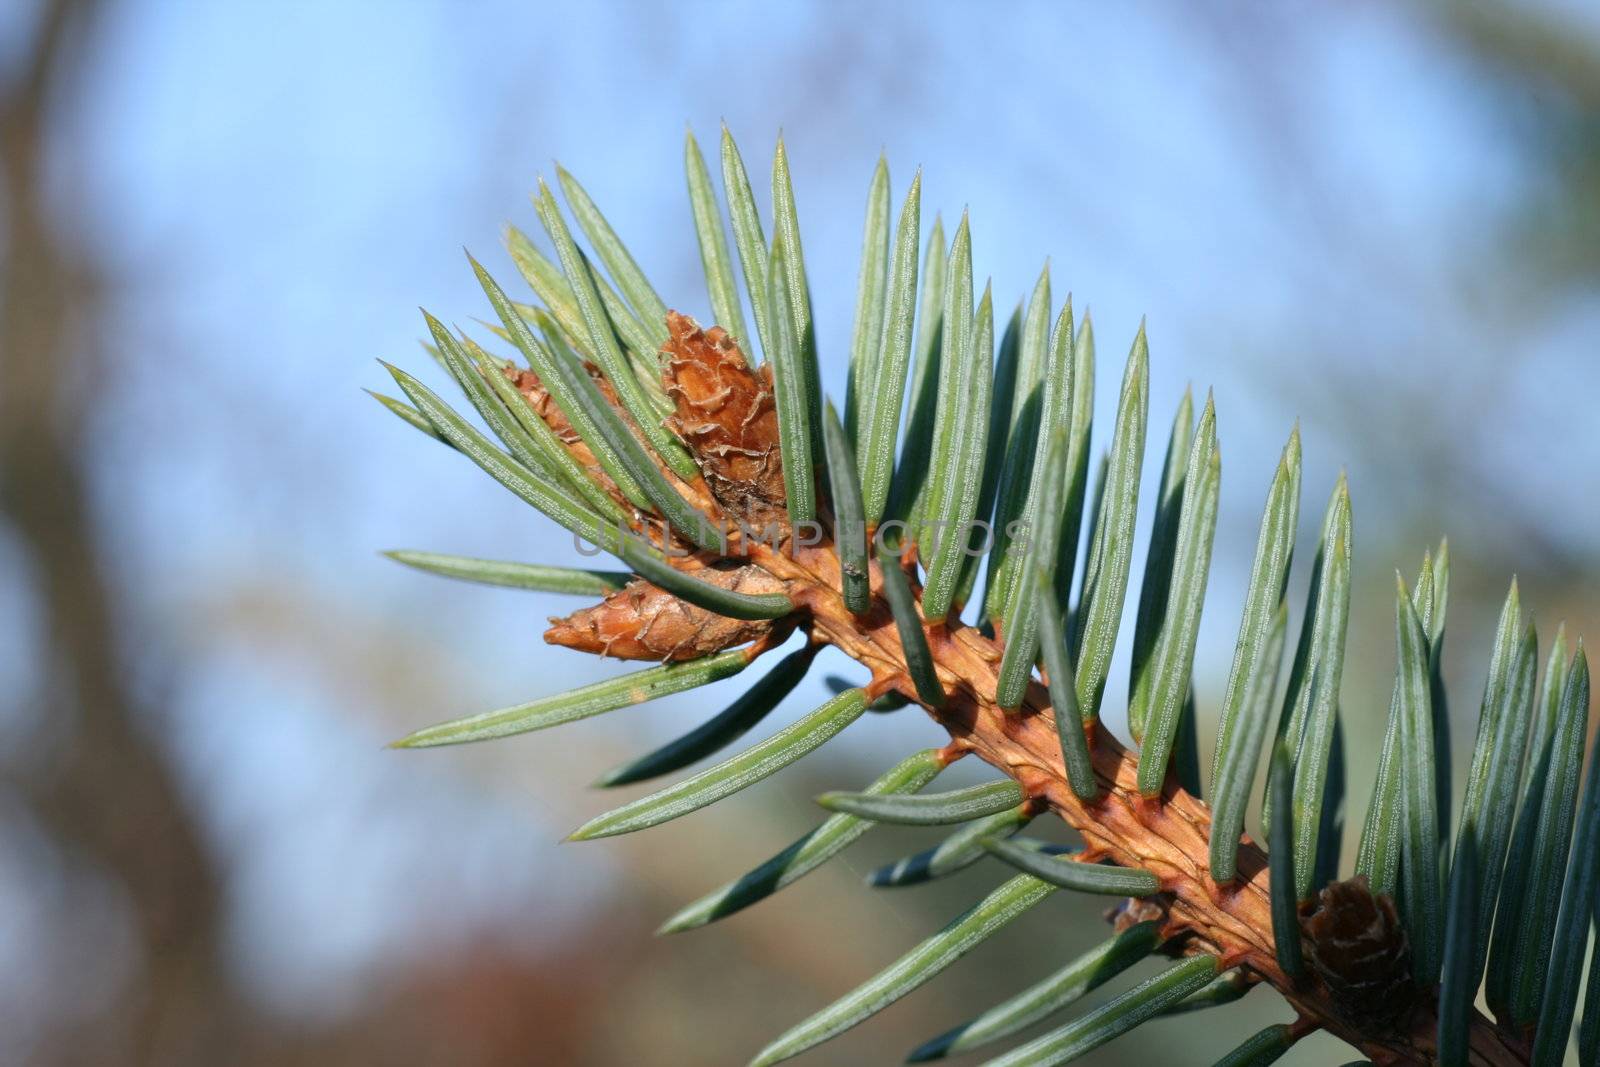 spruce, tree, plant, nature, Christmas tree, tradition, forest, needles, green, branch, sky, blue